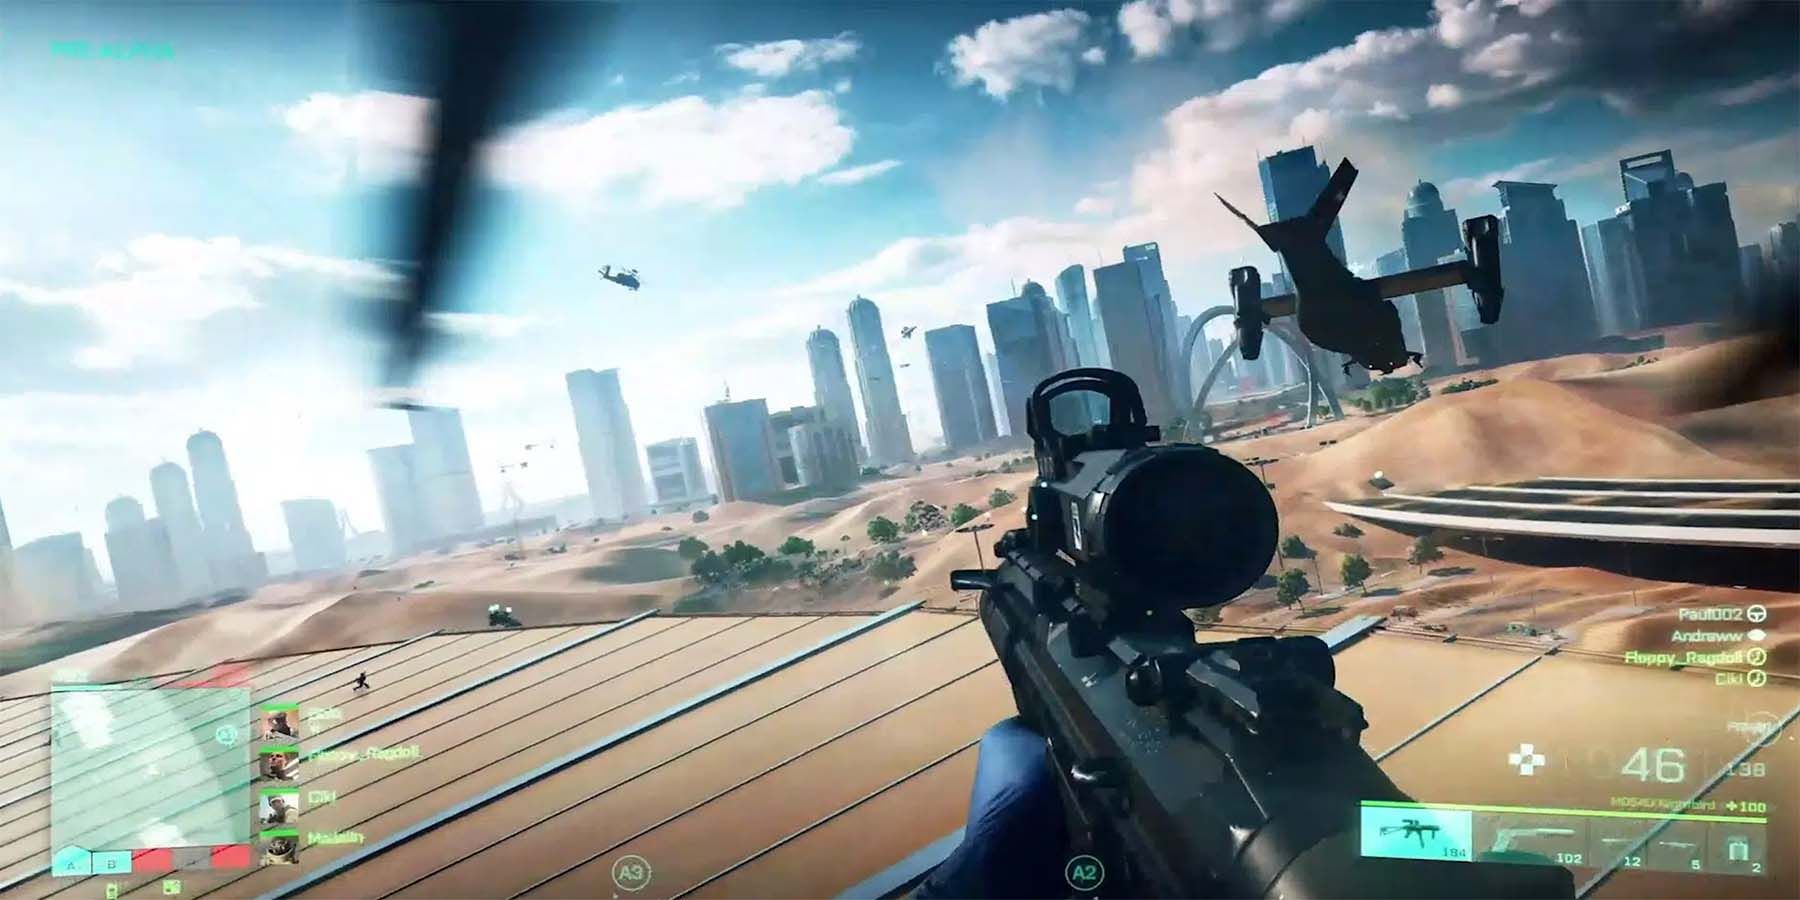 Does Battlefield 2042 Have Crossplay and Cross Save?